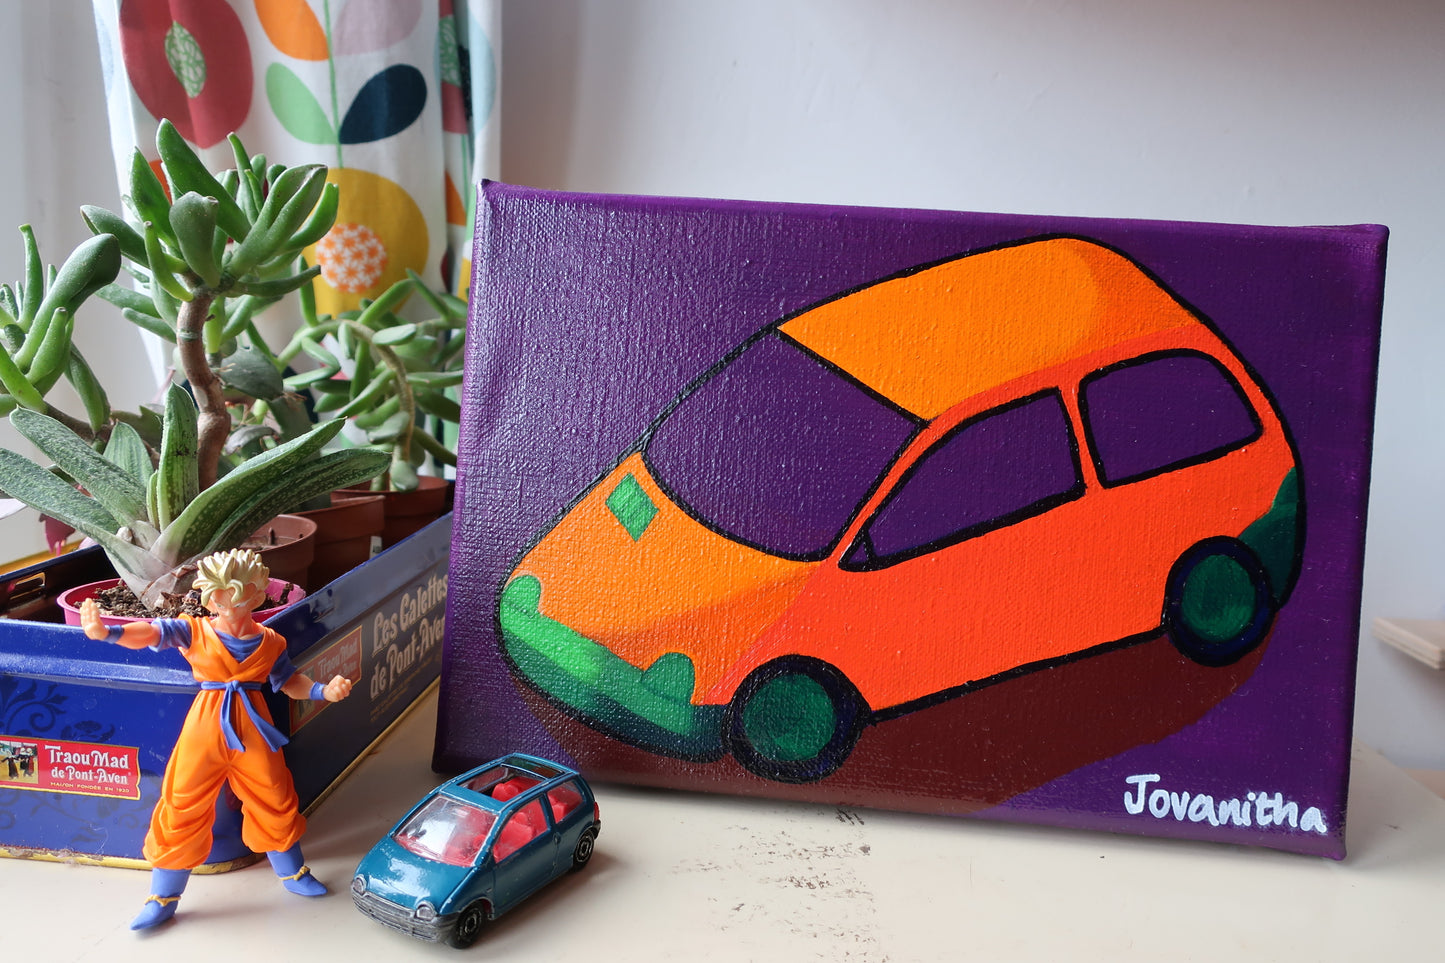 An oil painting of an orange Renault twingo car against a violet background on a white shelf